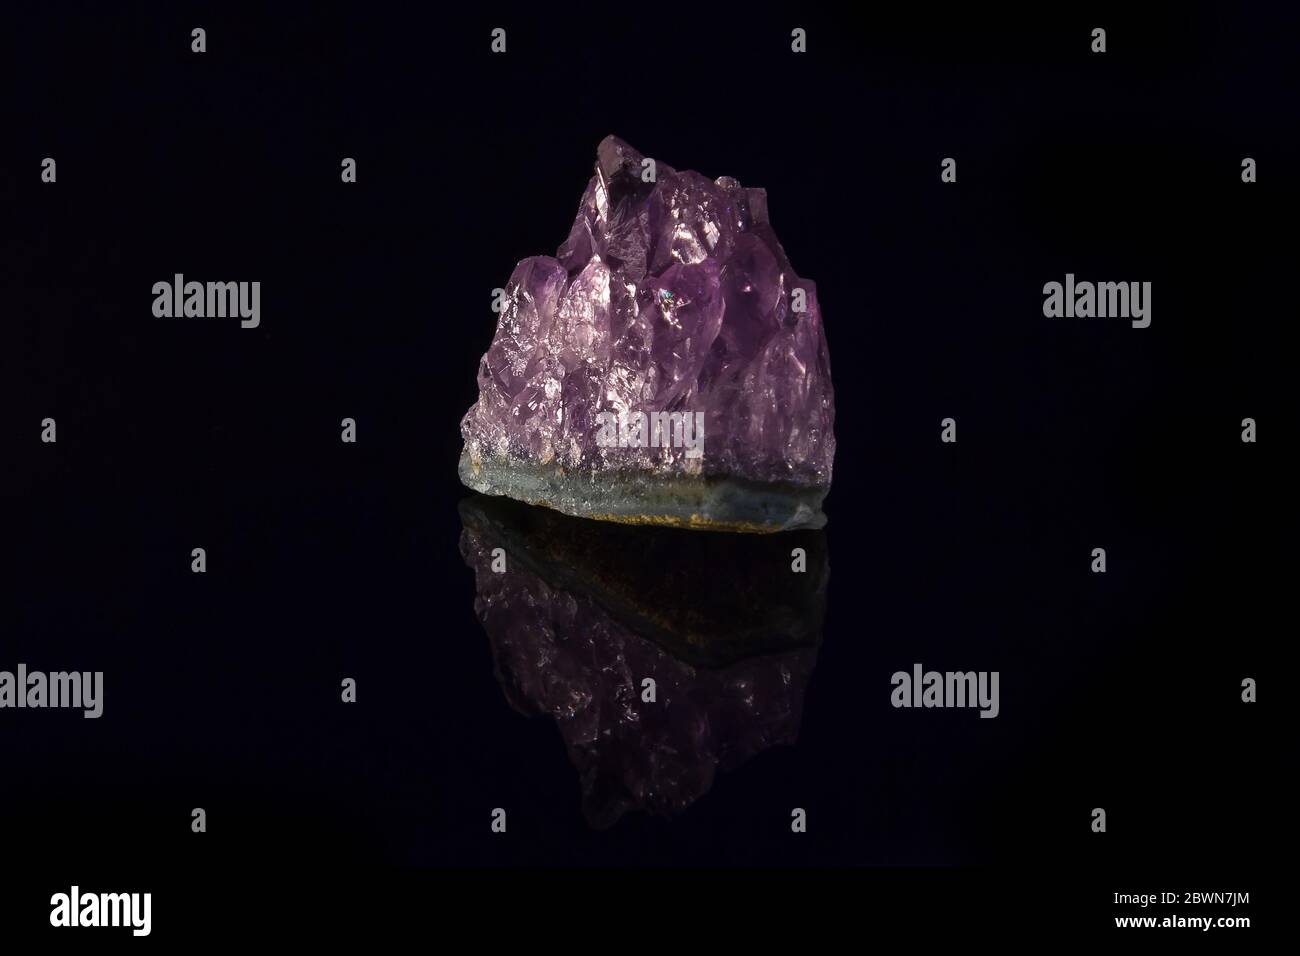 Purple amethyst semiprecious stone, isolated on black background, with reflection Stock Photo